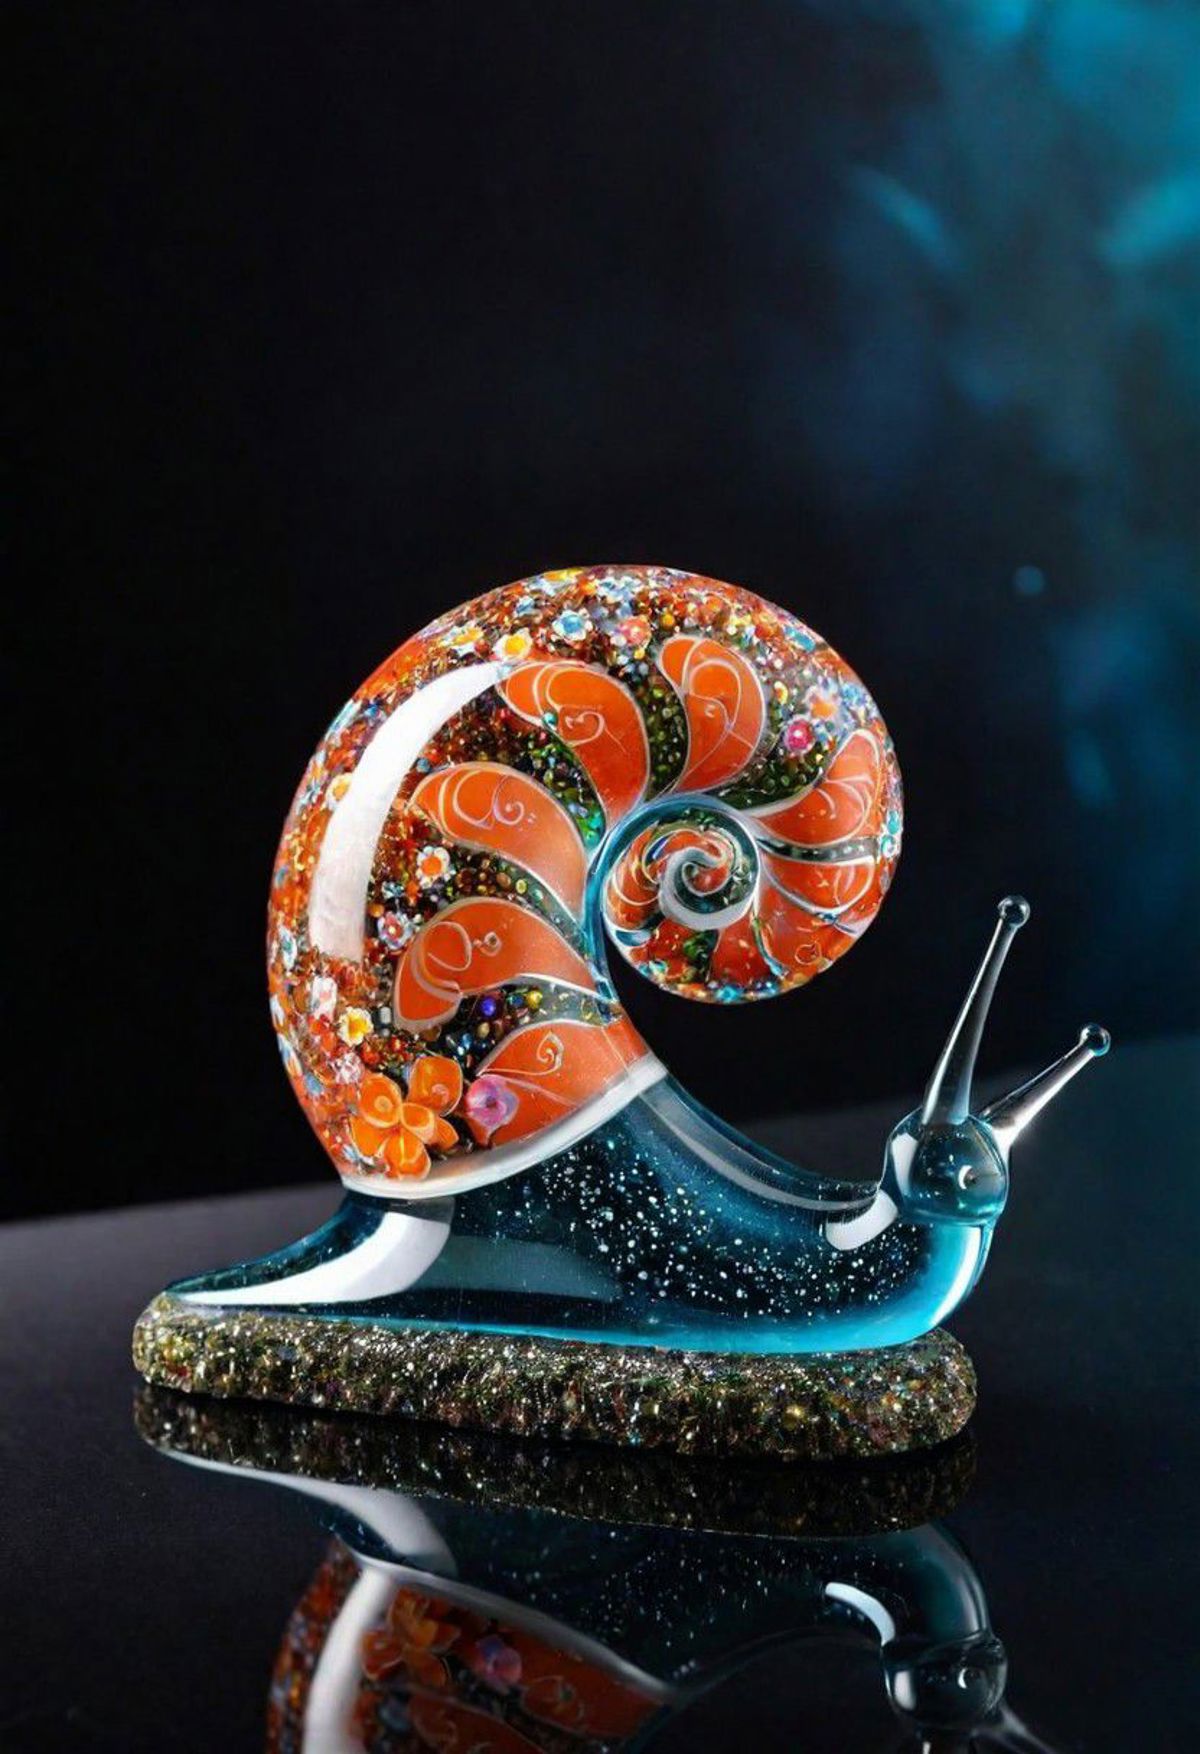 A colorful glass sculpture of a snail on a shiny surface.